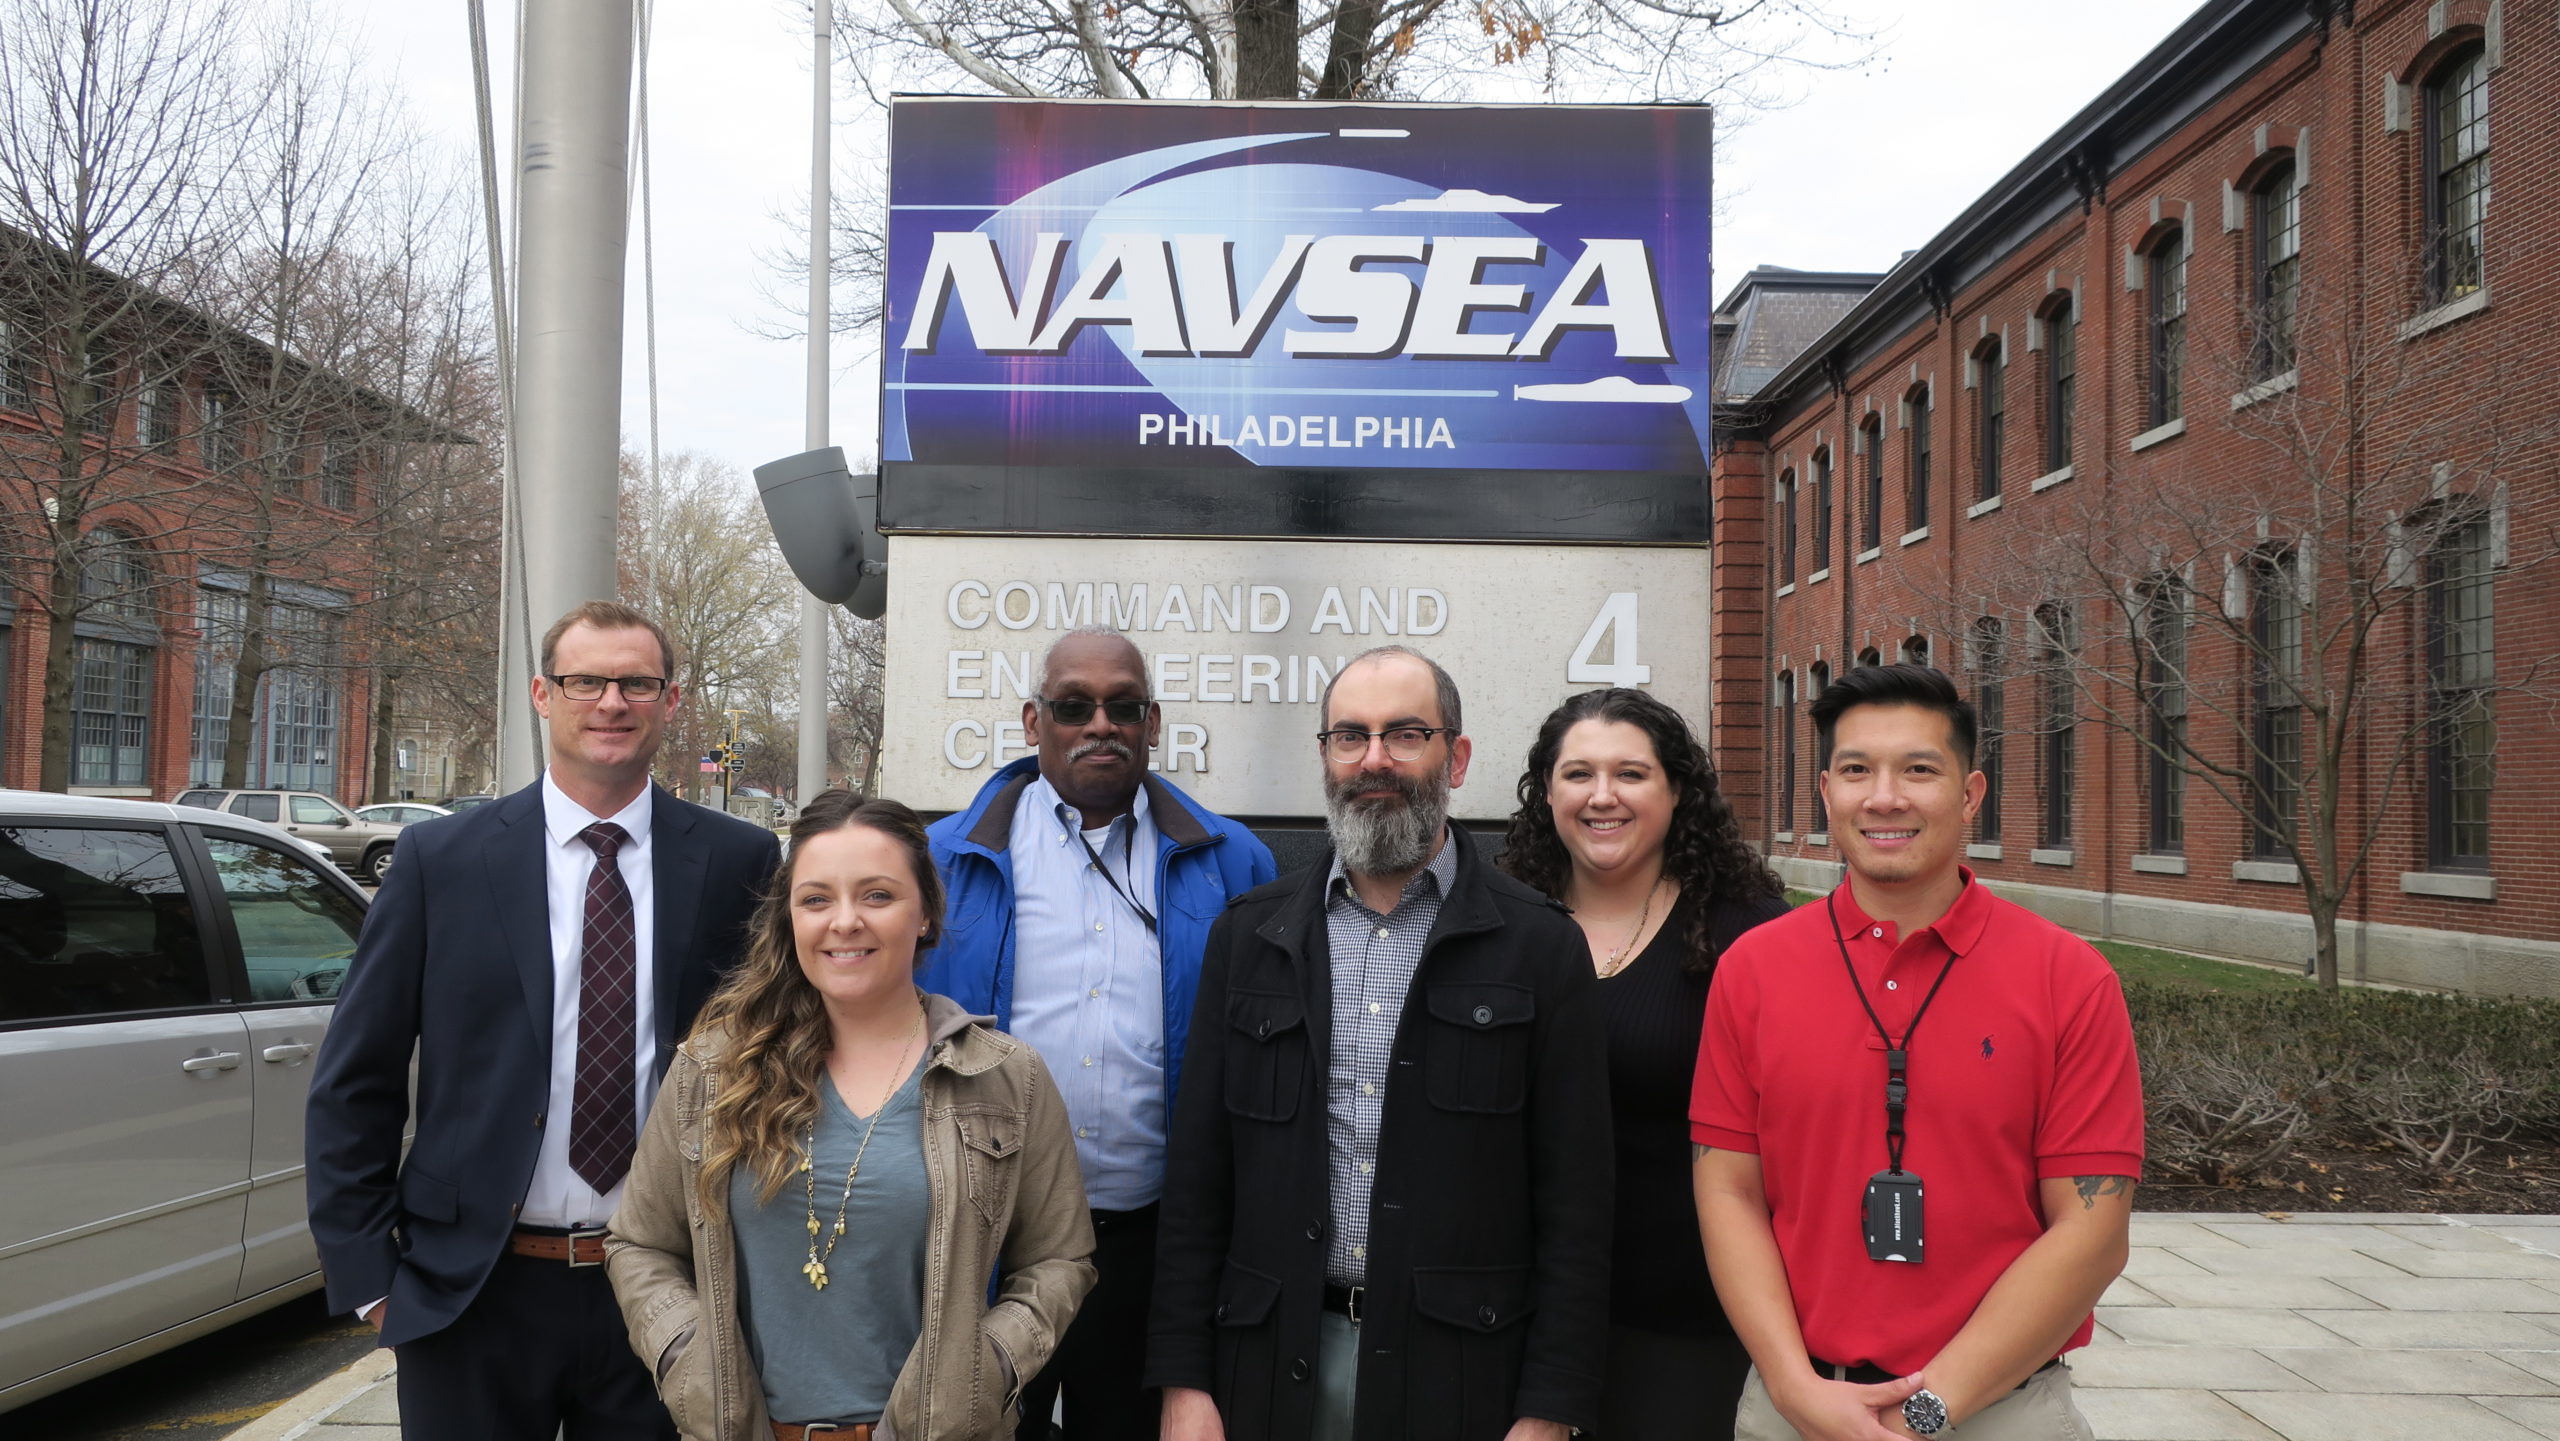 Eric Stone and FedWriters employees standing in front of a sign for the Naval Sea Systems Command in Philadelphia.